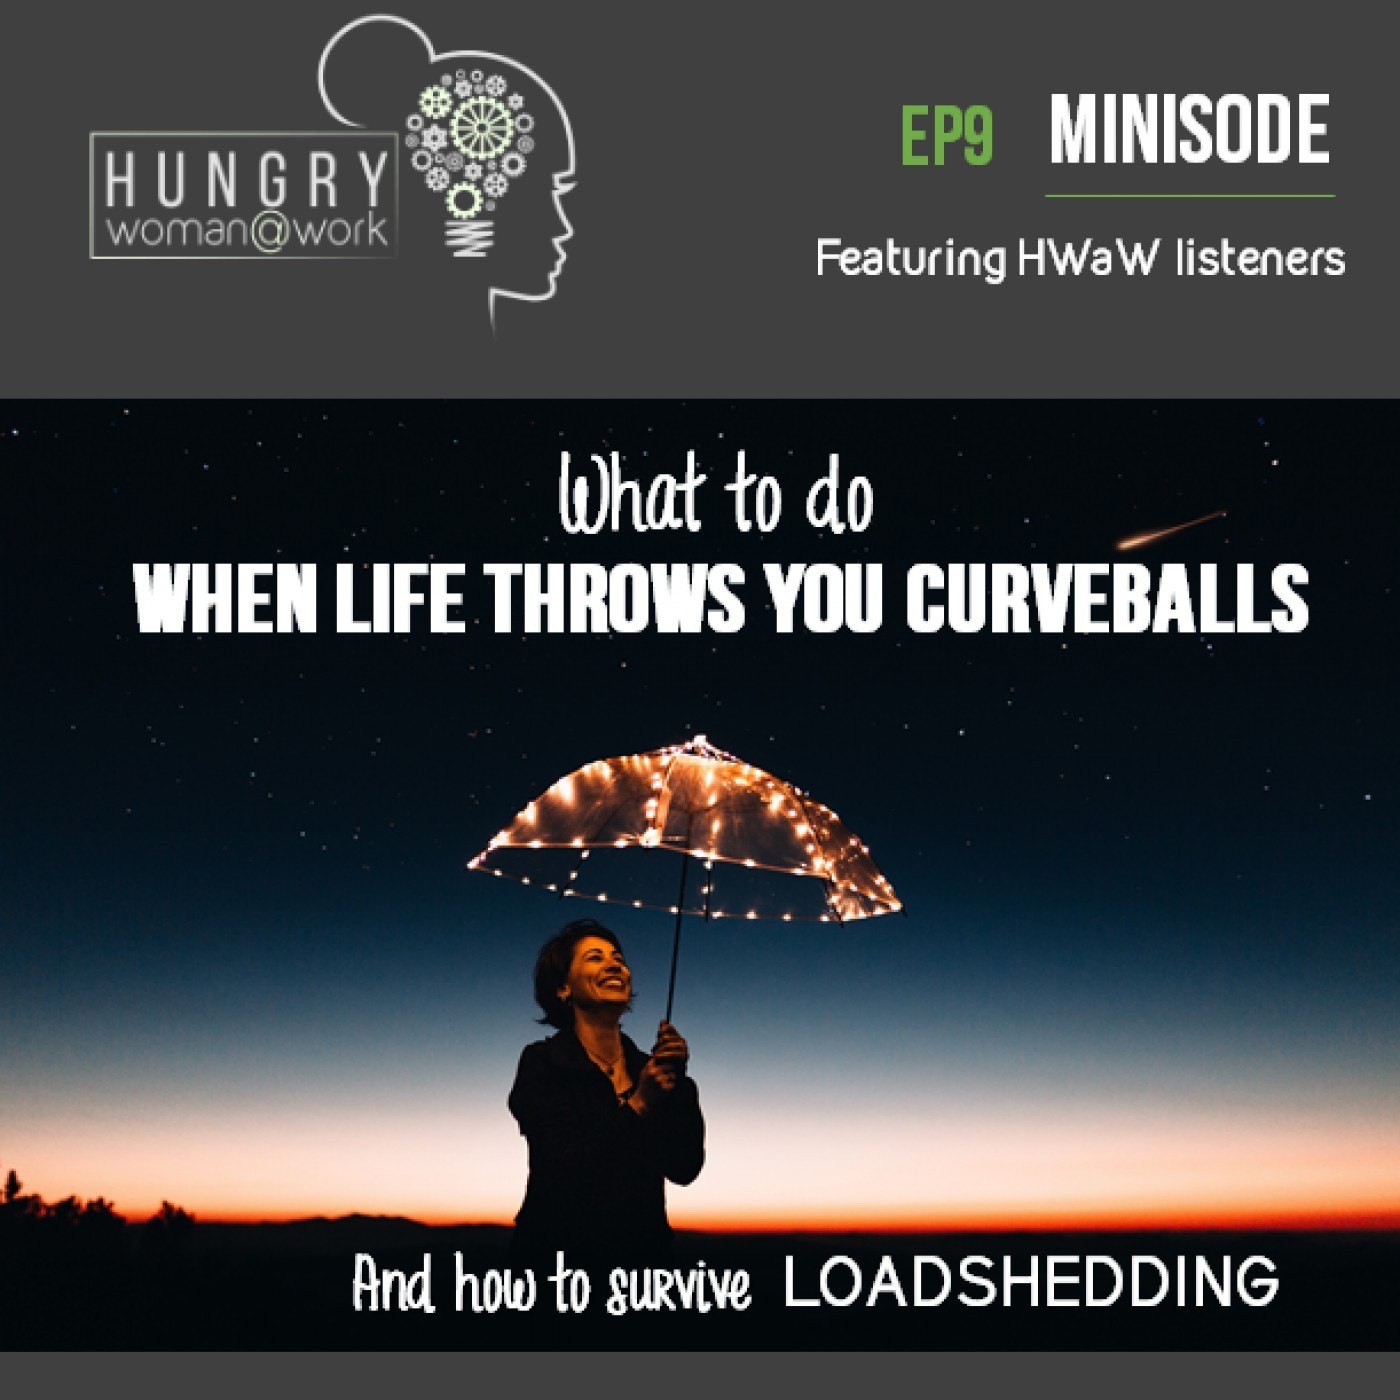 Ep 9: When life throws you curveballs... and how to survive loadshedding